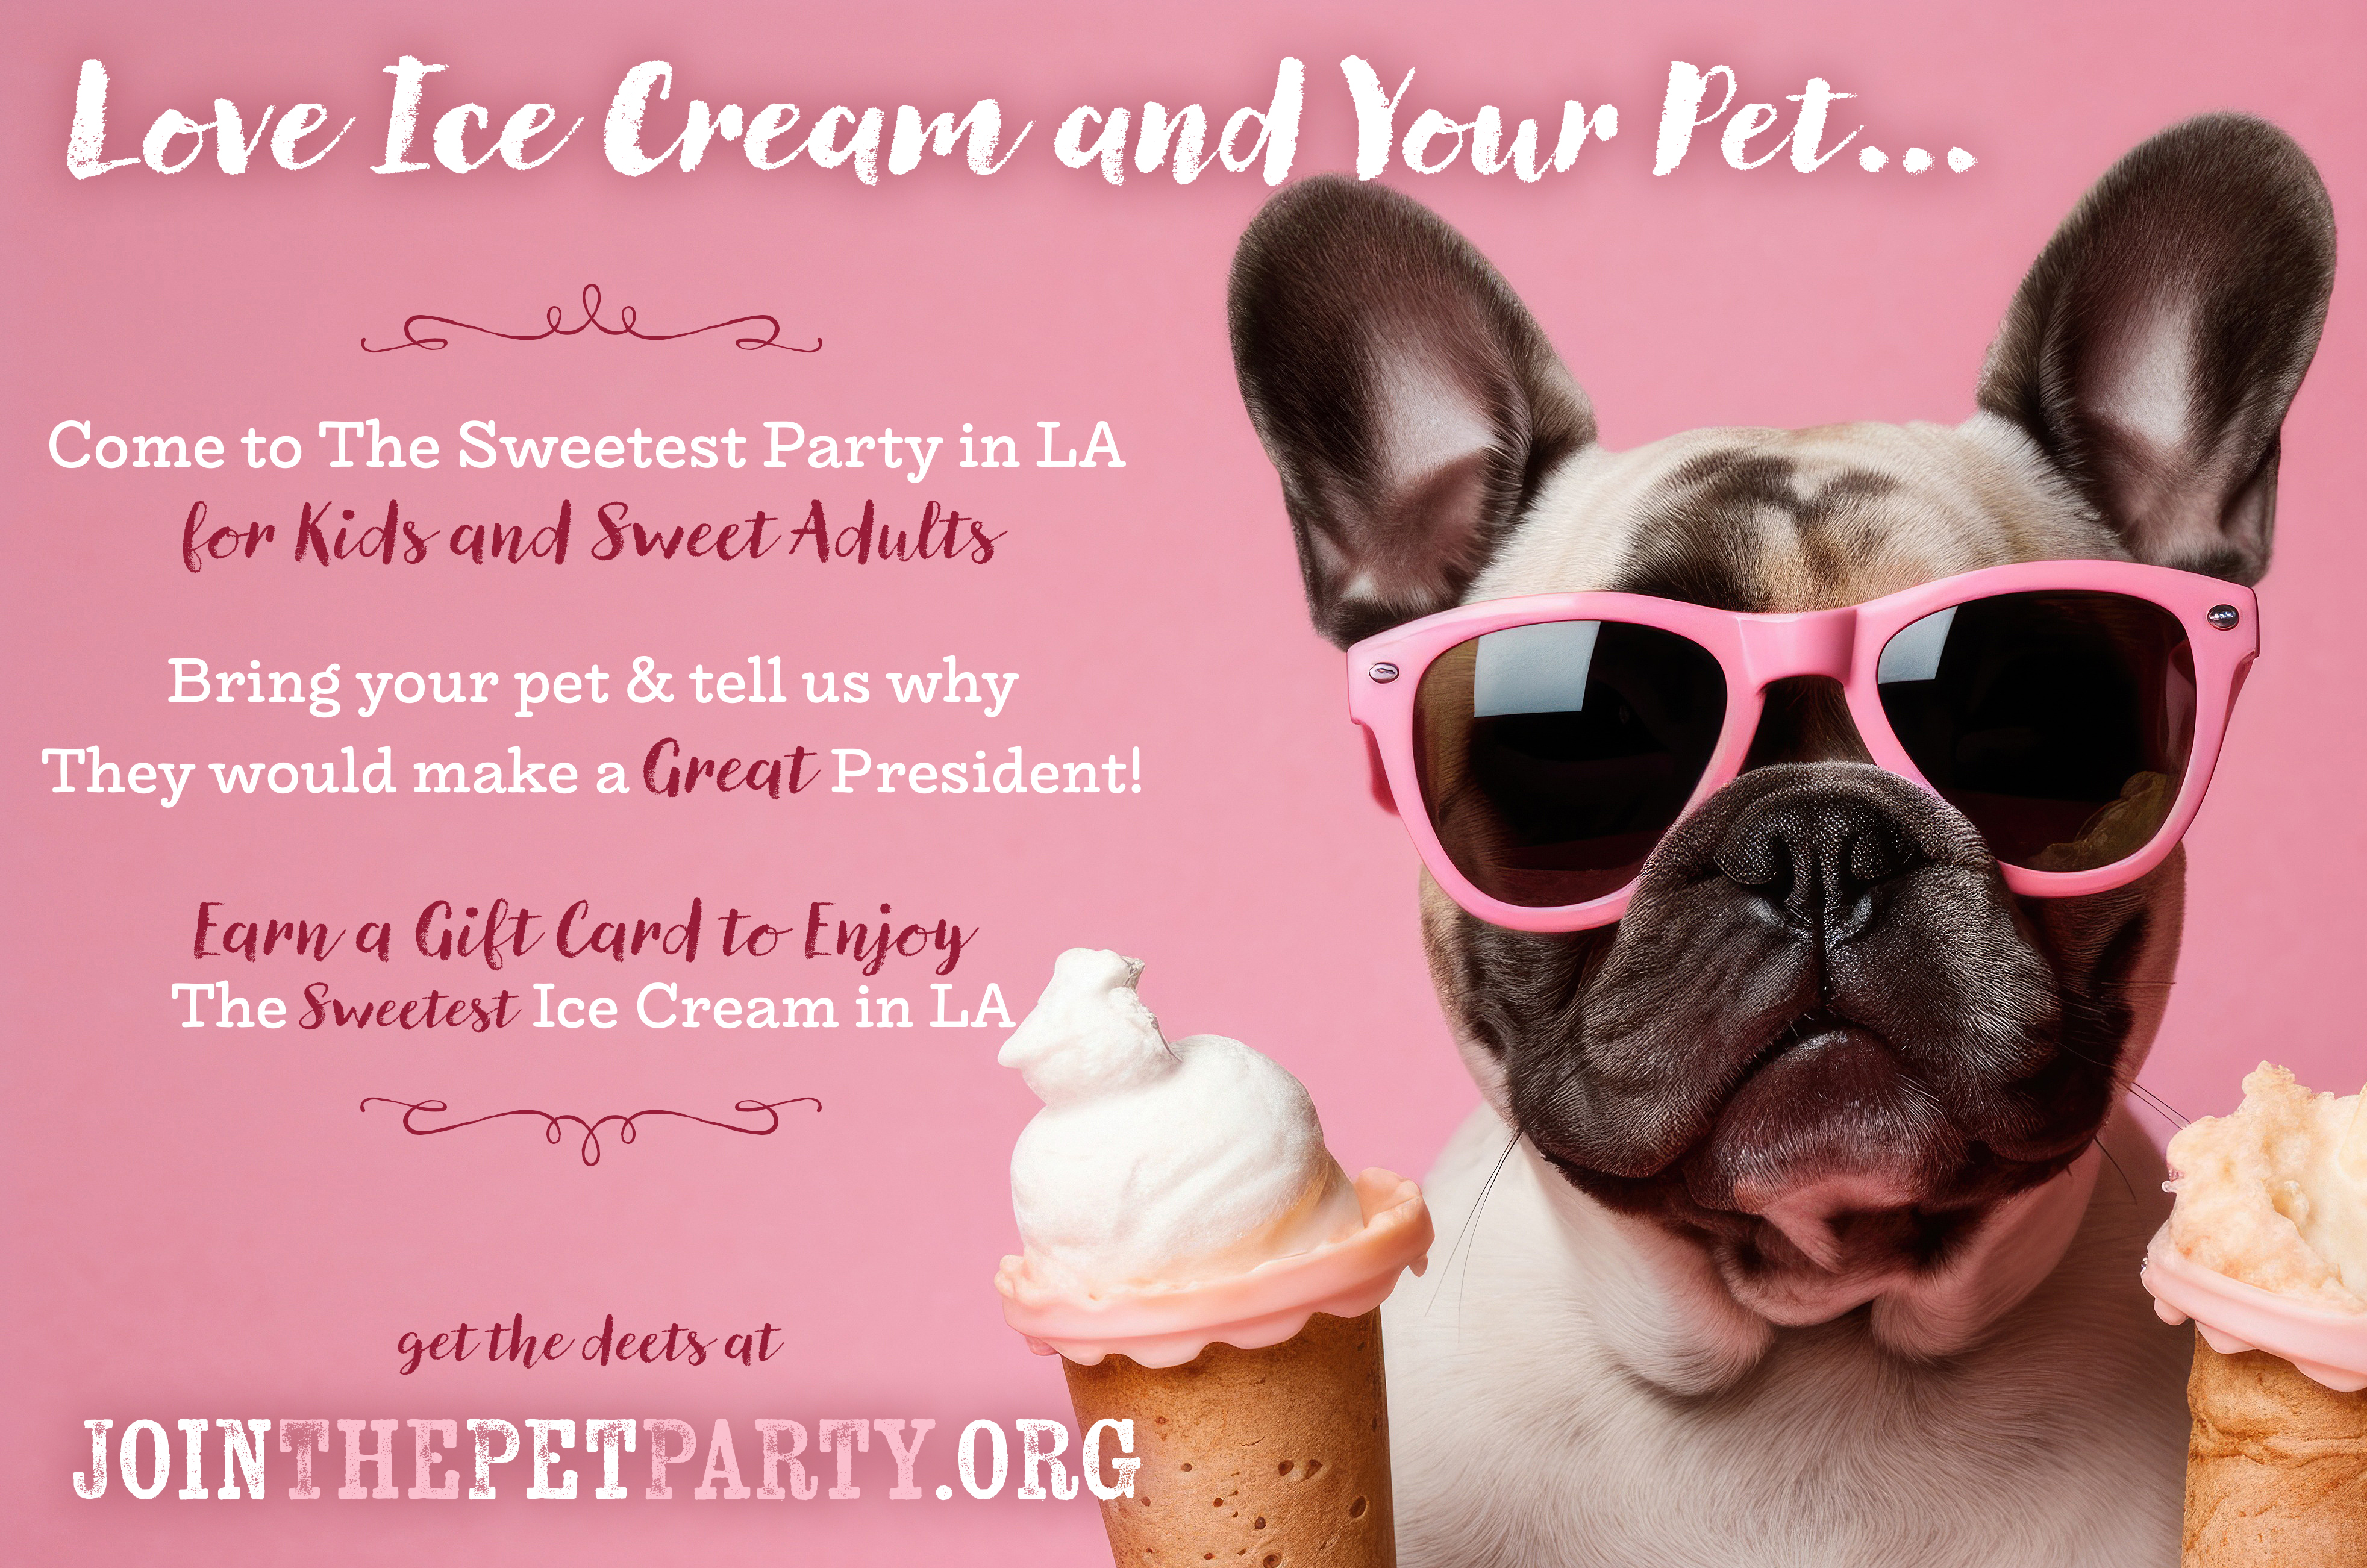 Love Ice Cream and Your Pet Attend The Sweetest Party for Good in Culver City